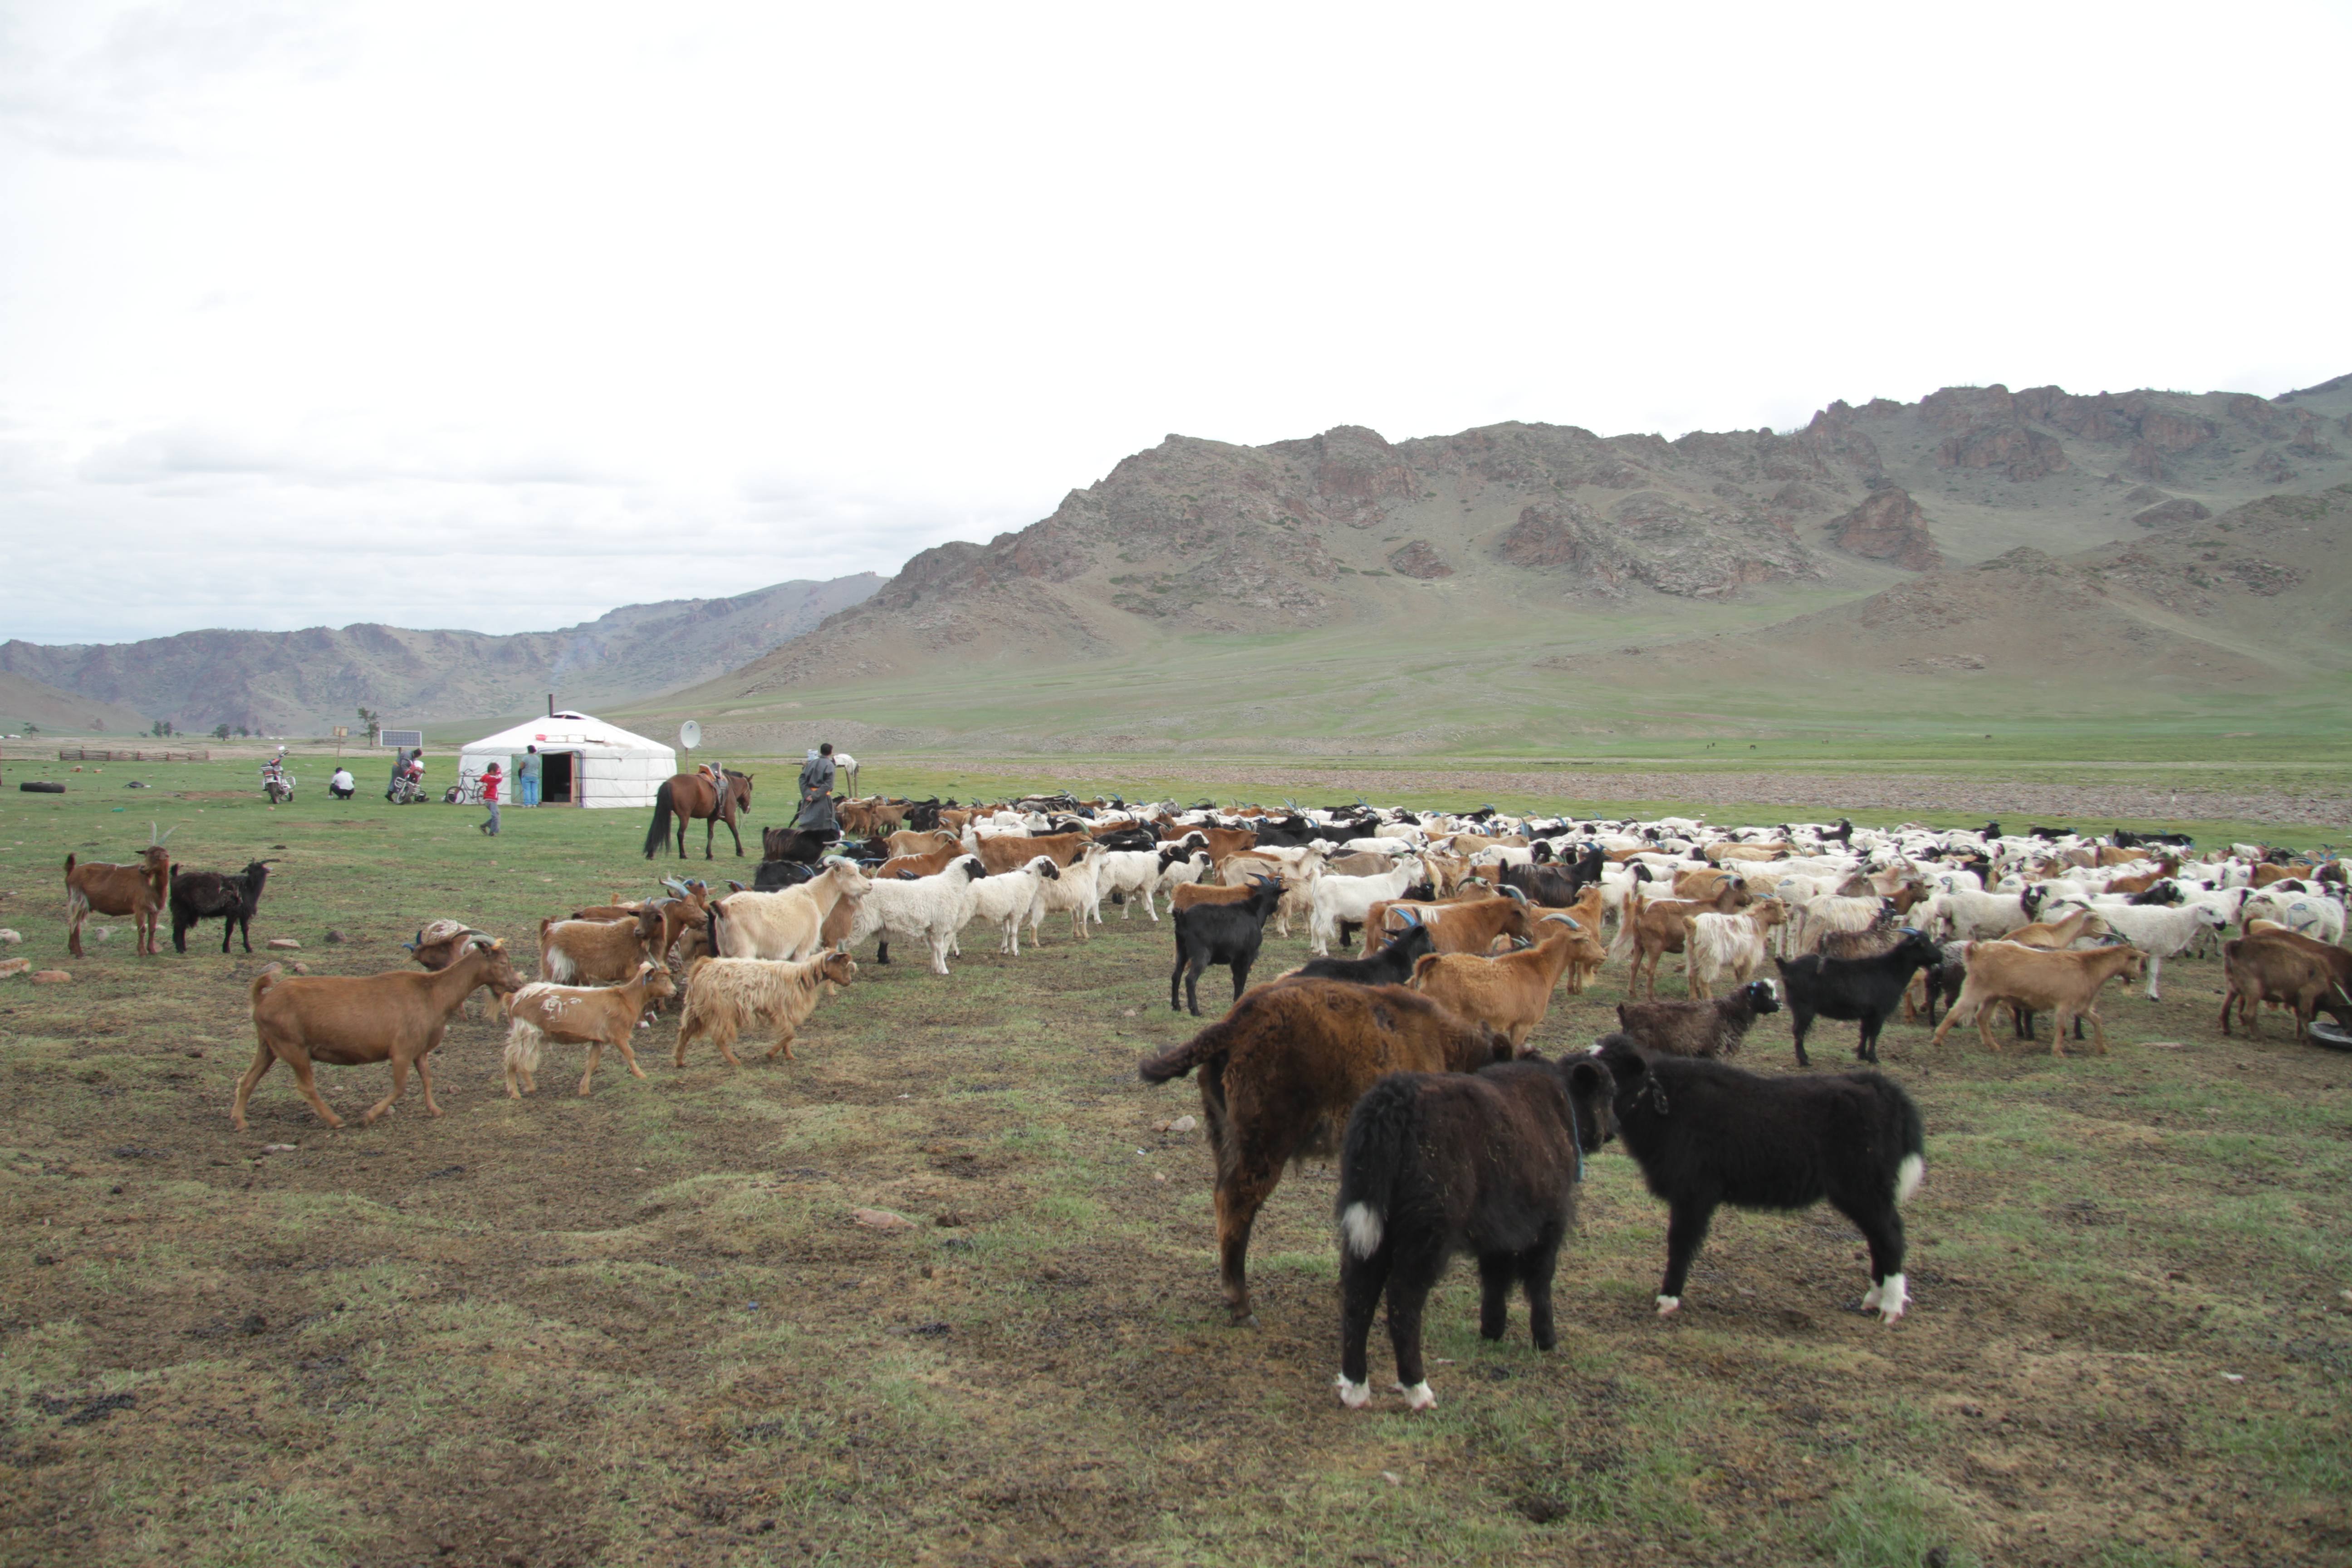 Mixed heard of livestock in front of a yurt.